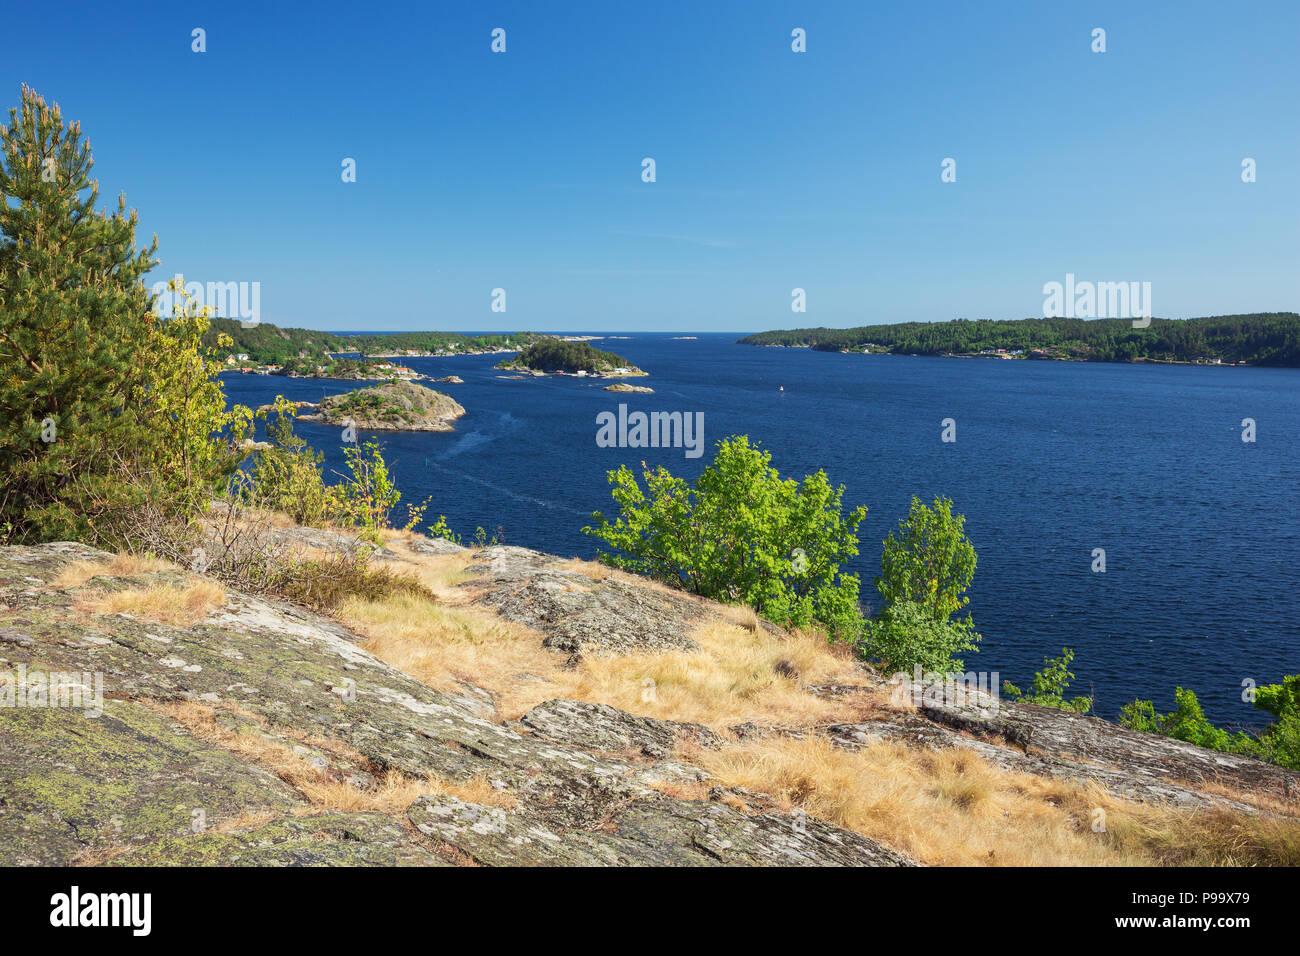 Typical coastal landscape near Kragero with many islands and inlets Stock Photo